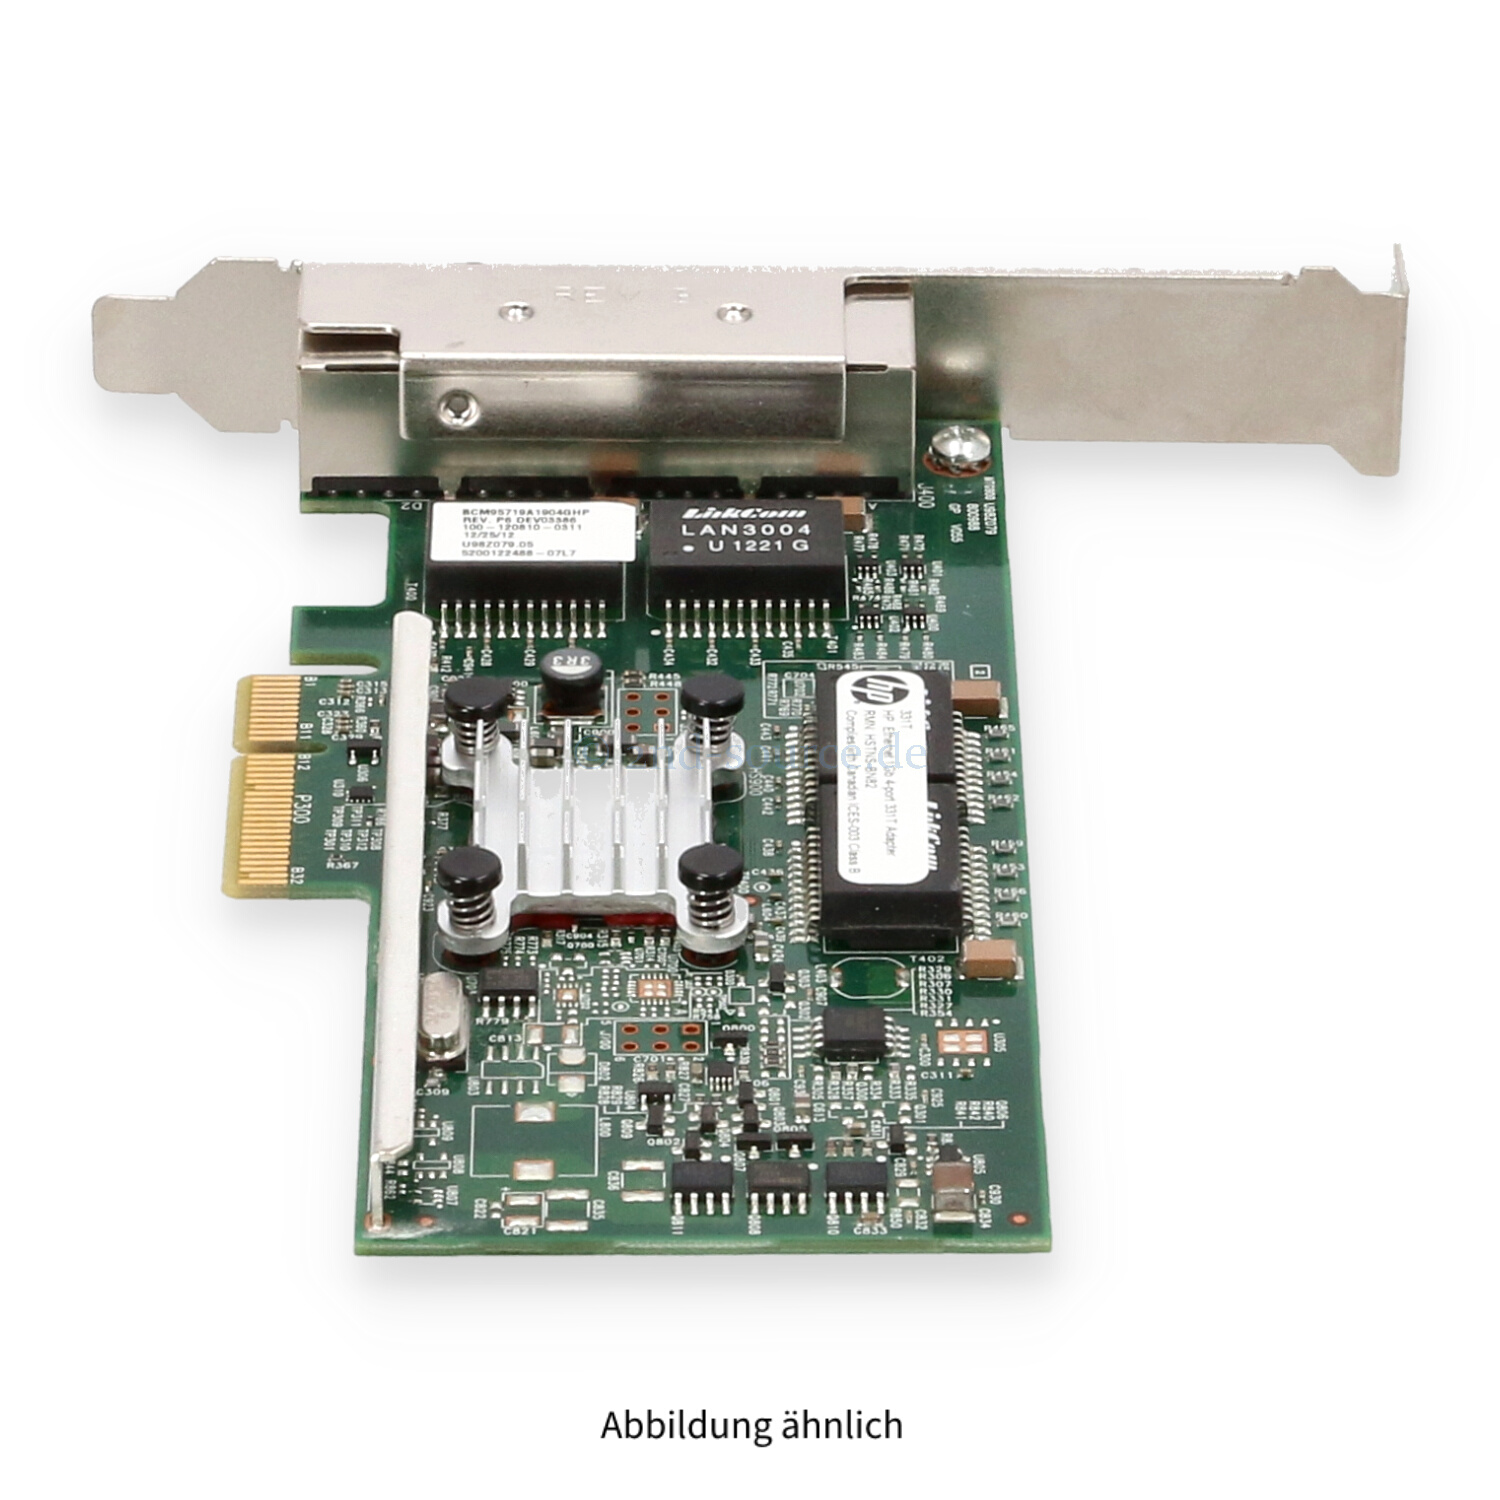 HPE 331T 4x1000Base-T PCIe Server Ethernet Adapter High Profile 647594-B21 649871-001